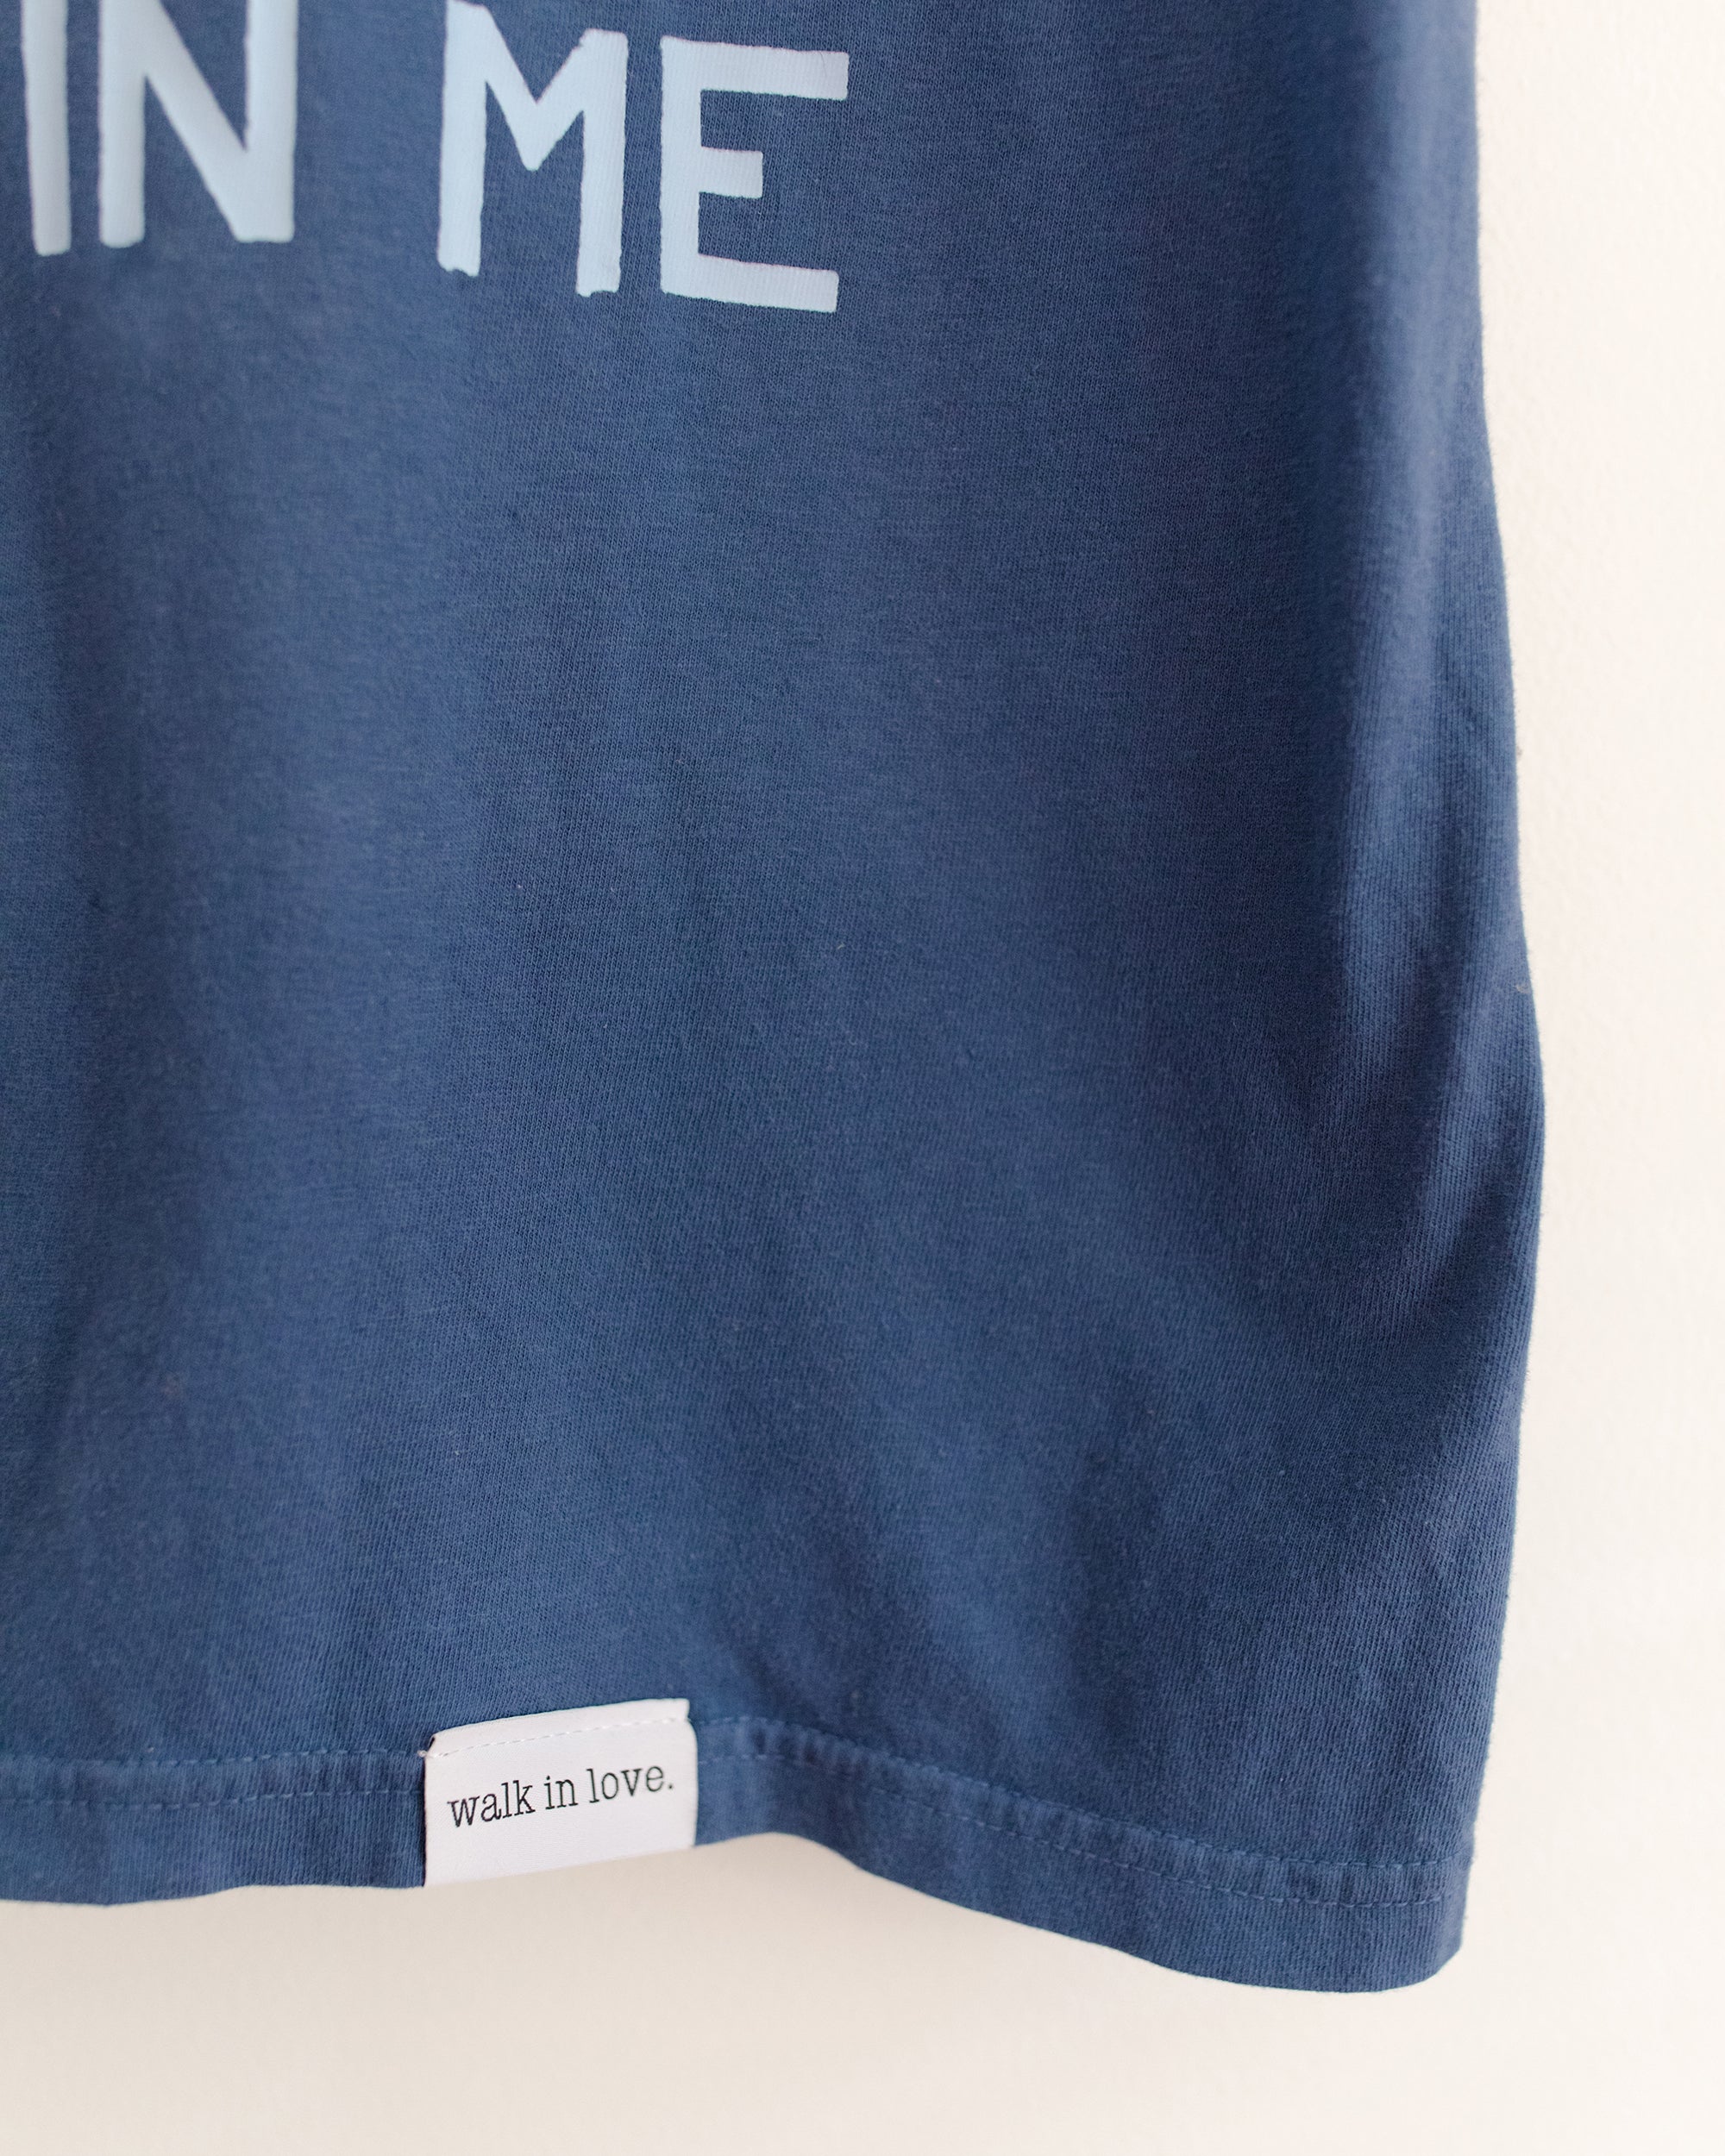 Abide in Me Vintage Washed China Blue Tee